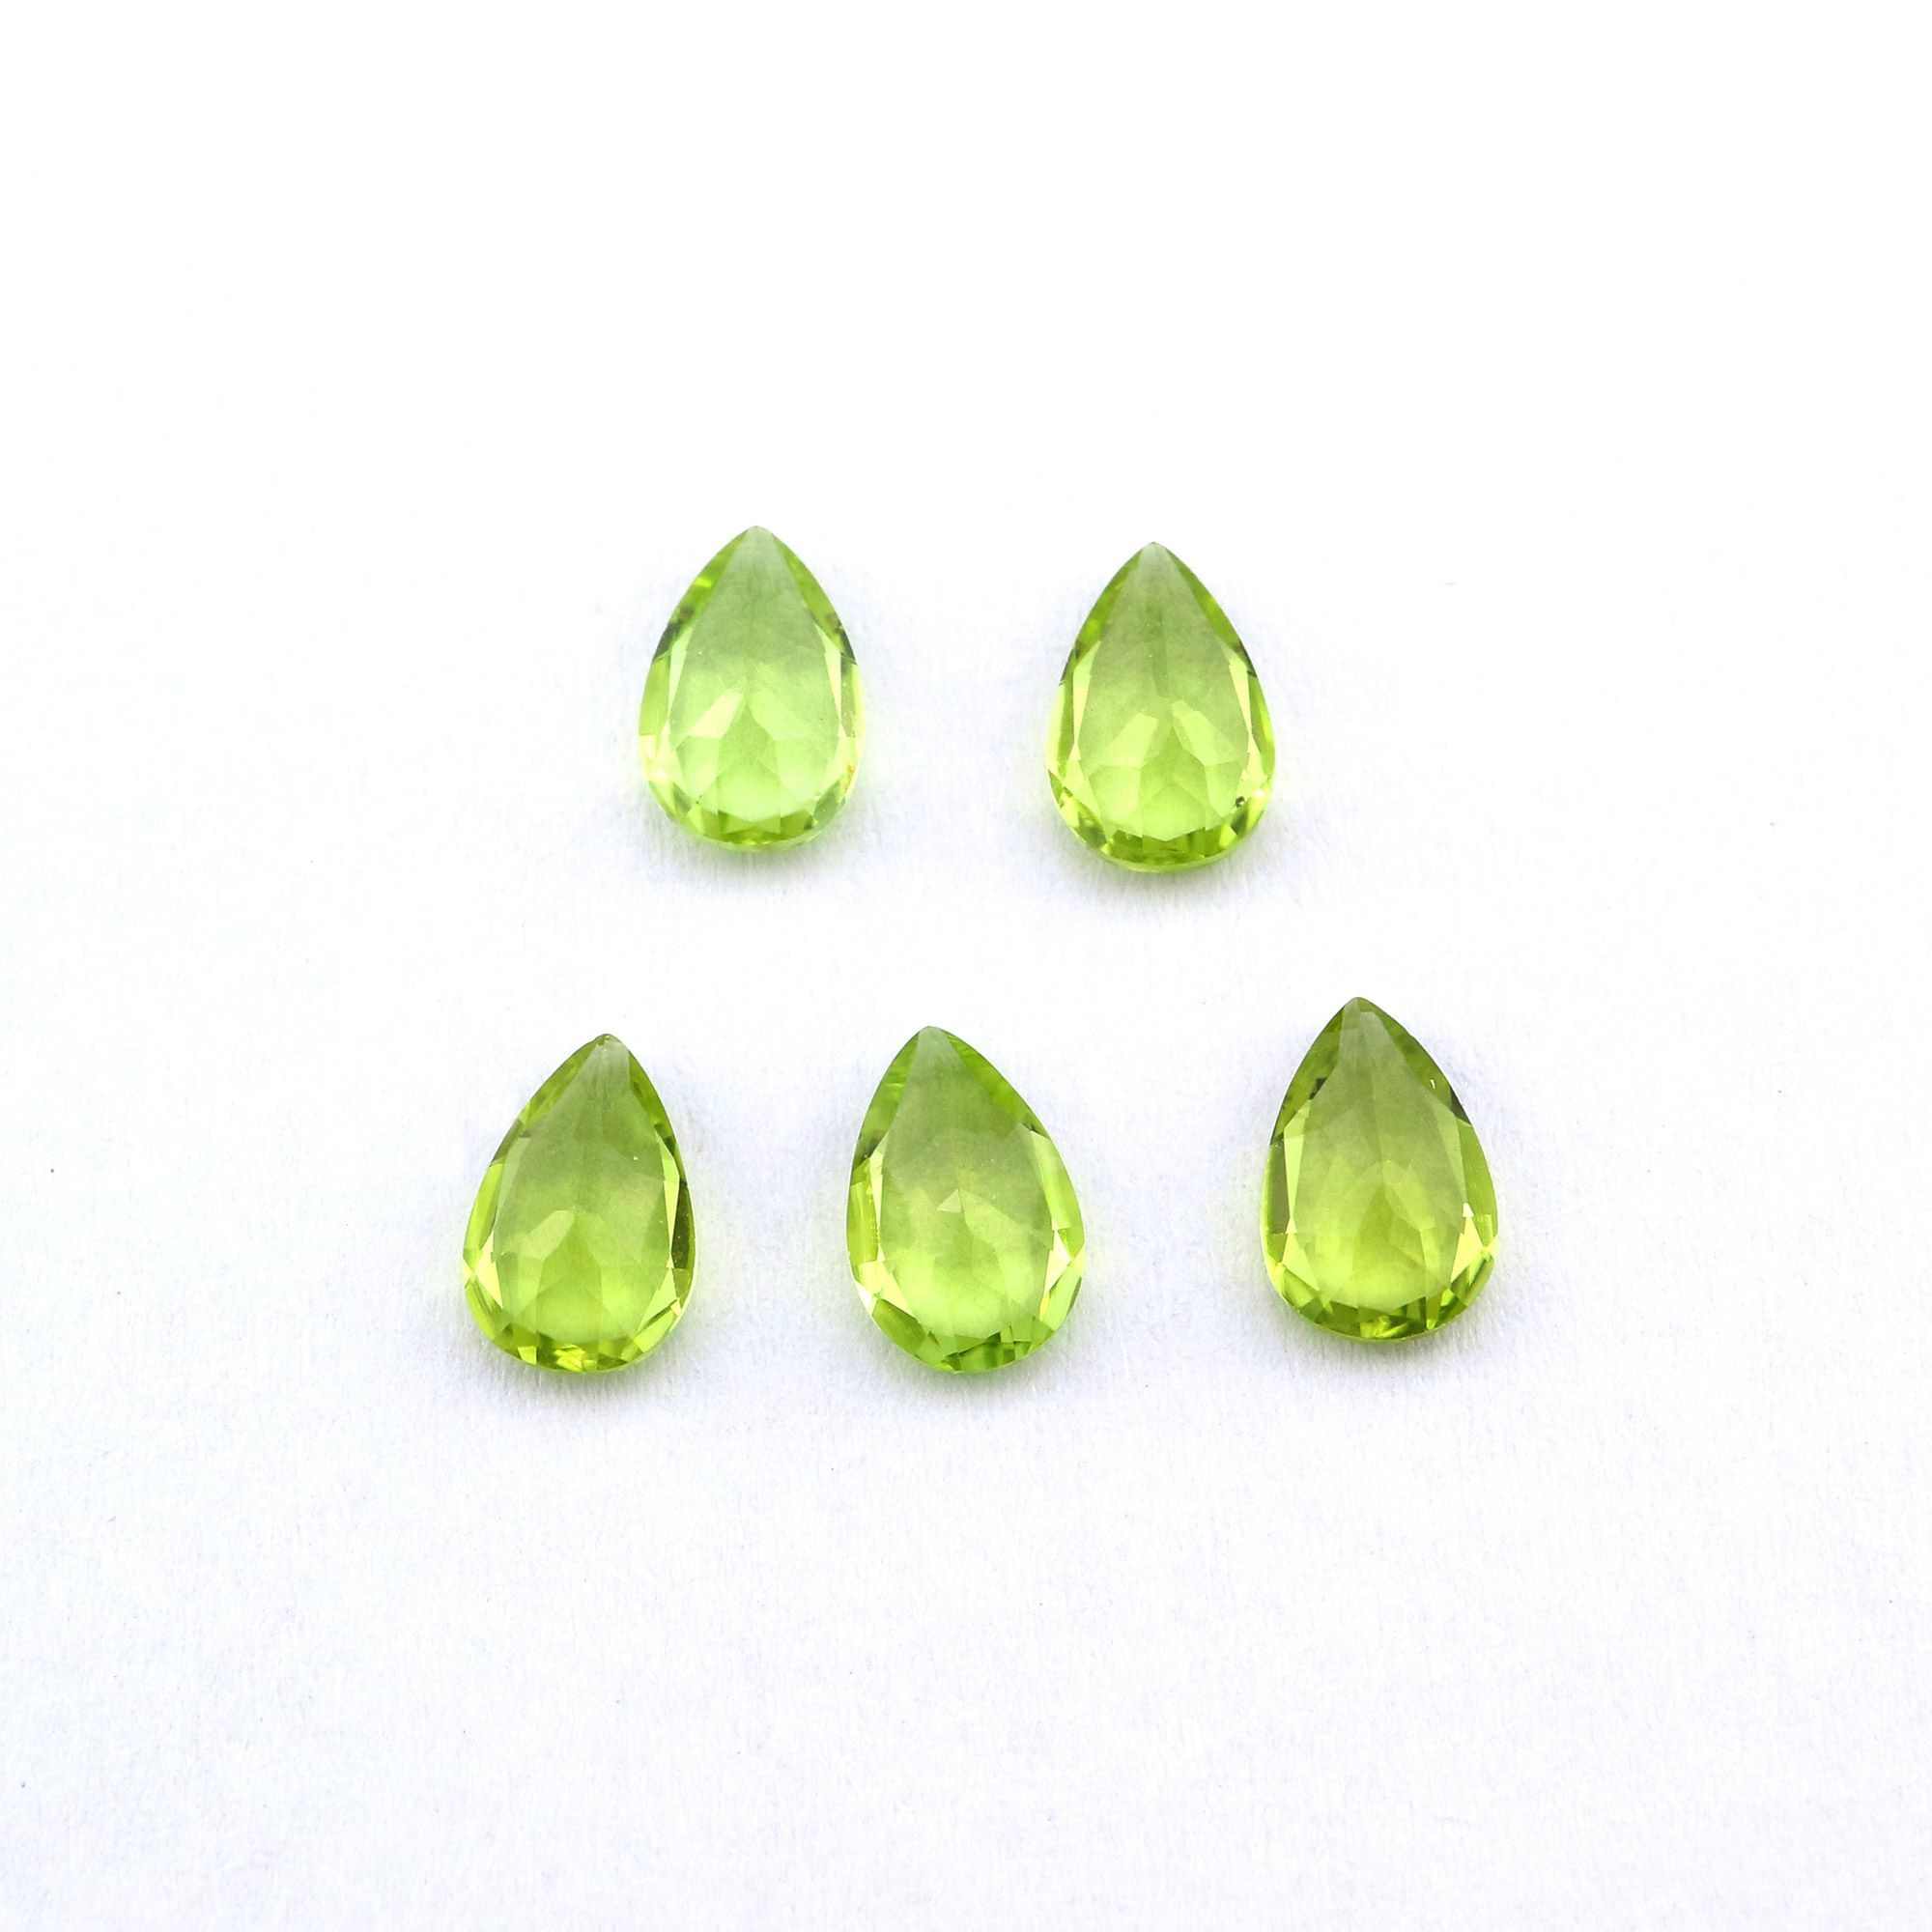 5Pcs Pear Green Peridot August Birthstone Faceted Cut Loose Gemstone Natural Semi Precious Stone DIY Jewelry Supplies 4150006 - Click Image to Close